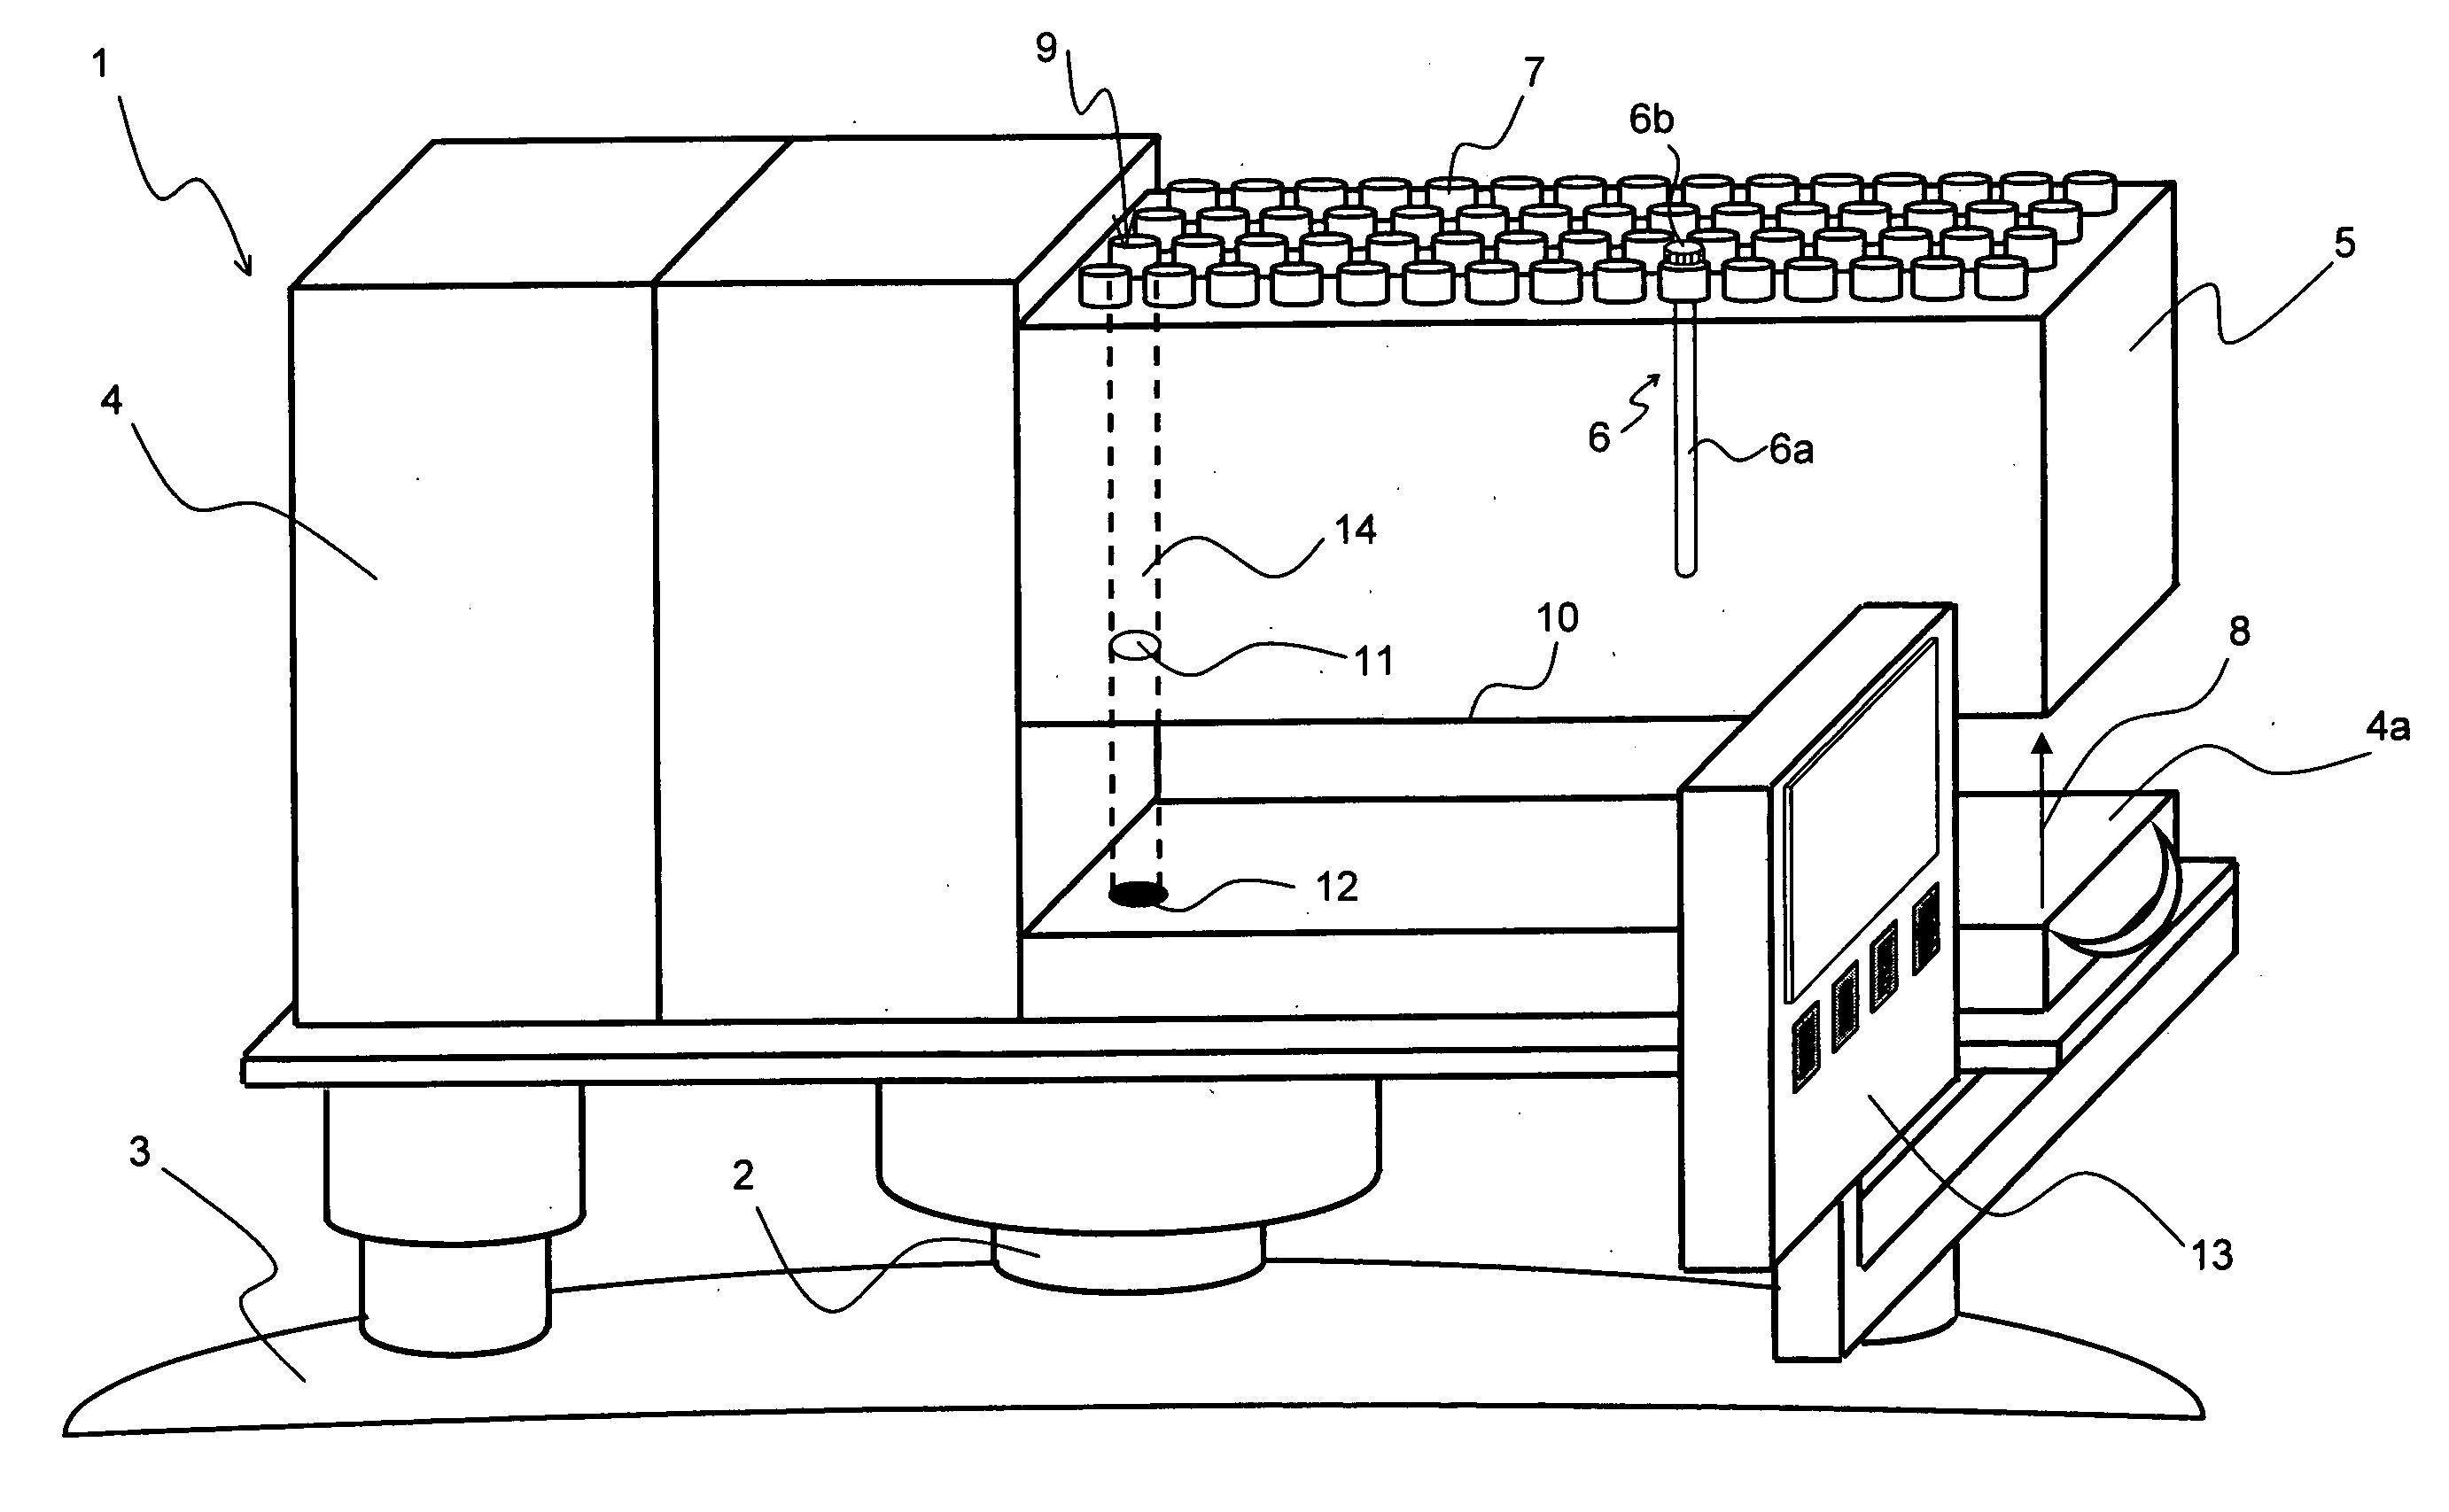 Sample exchange device having a sample receptacle guided through a meandering path, in particular for an NMR spectrometer